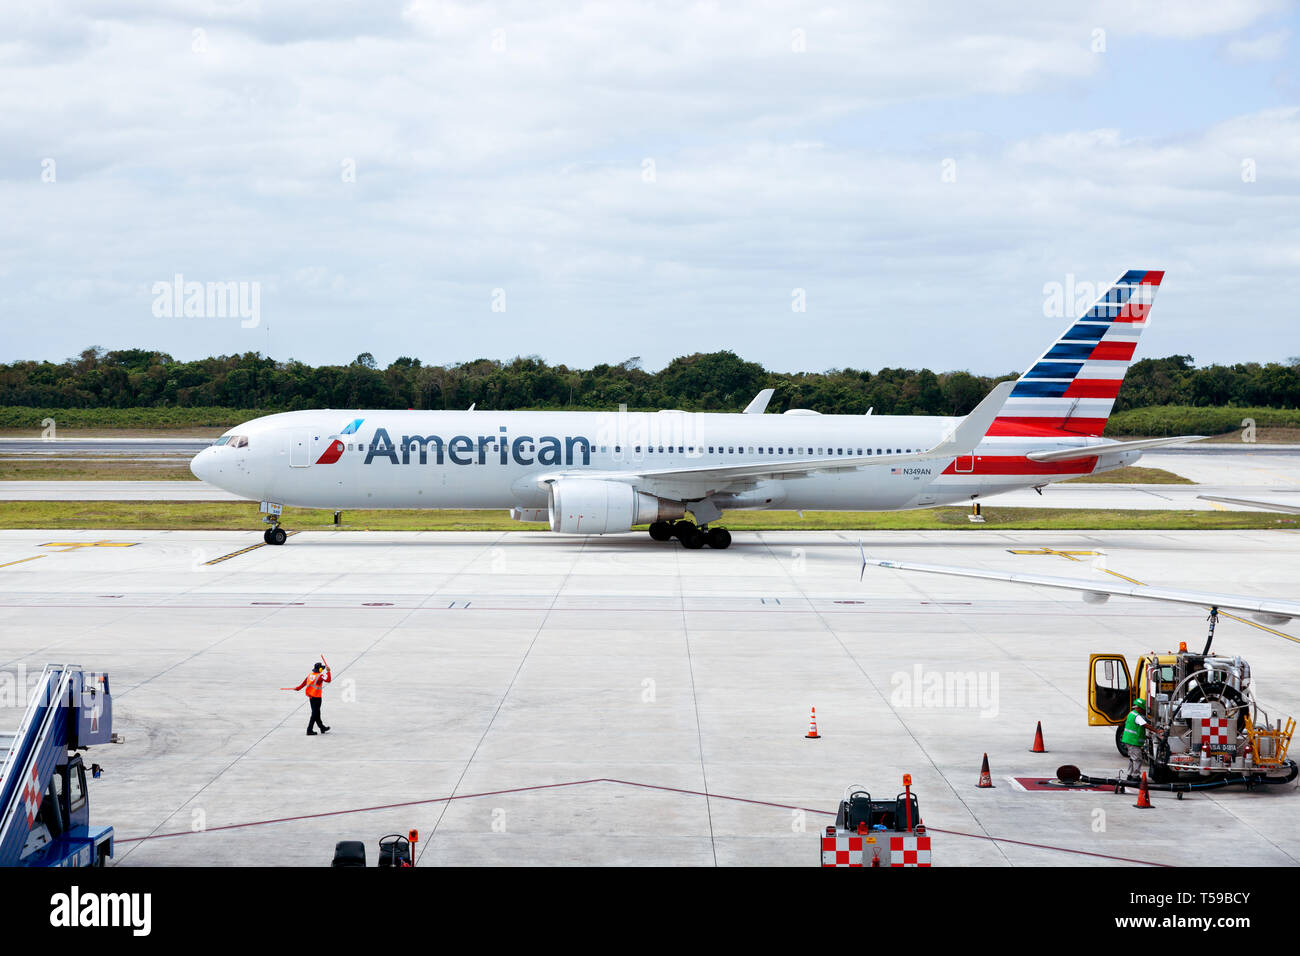 American Airlines plane on the tarmac at Cancun Airport, Cancun, Mexico Stock Photo